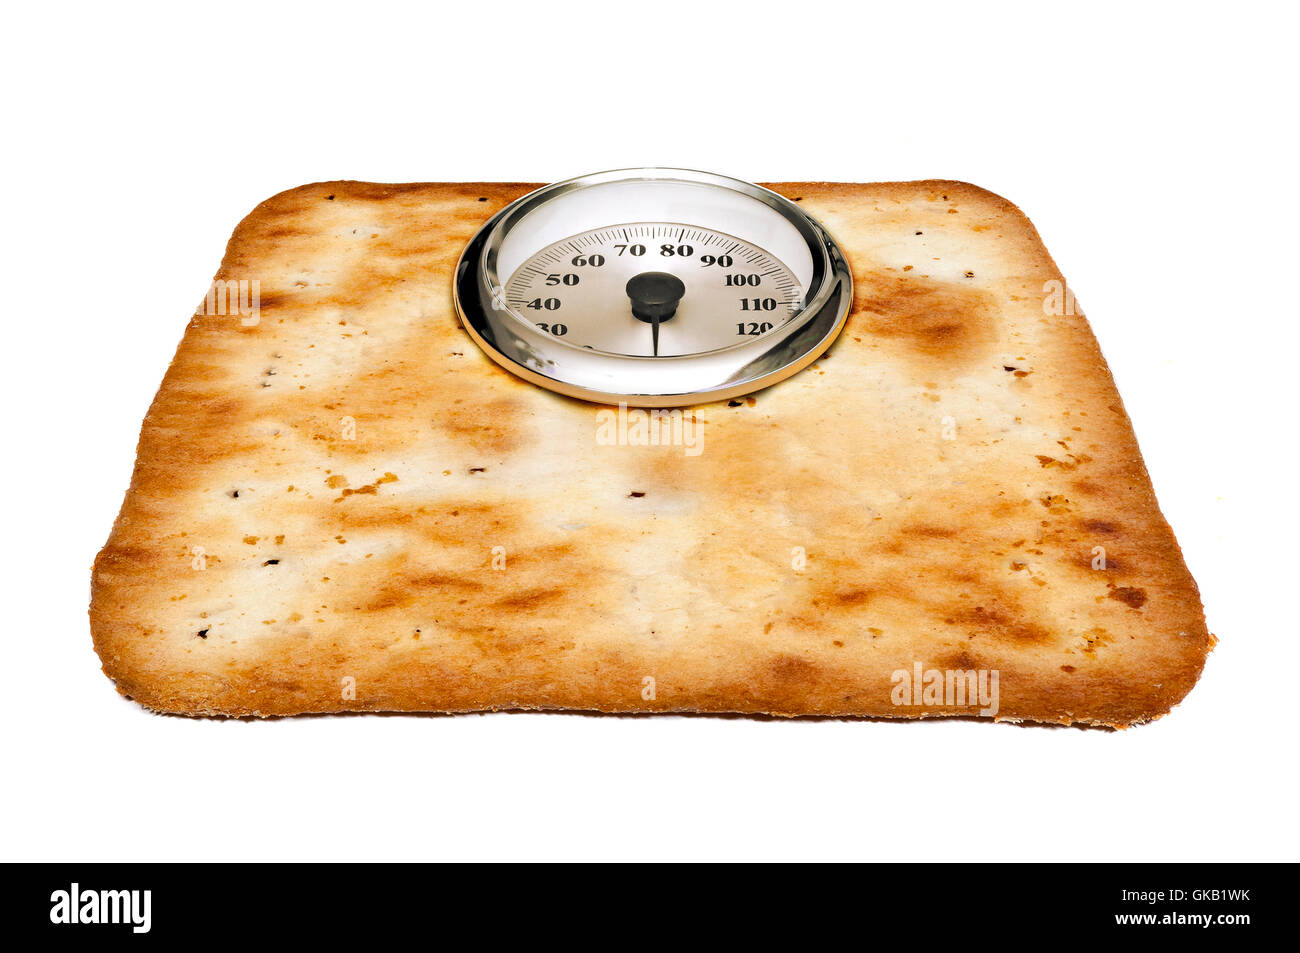 diet weight control Stock Photo